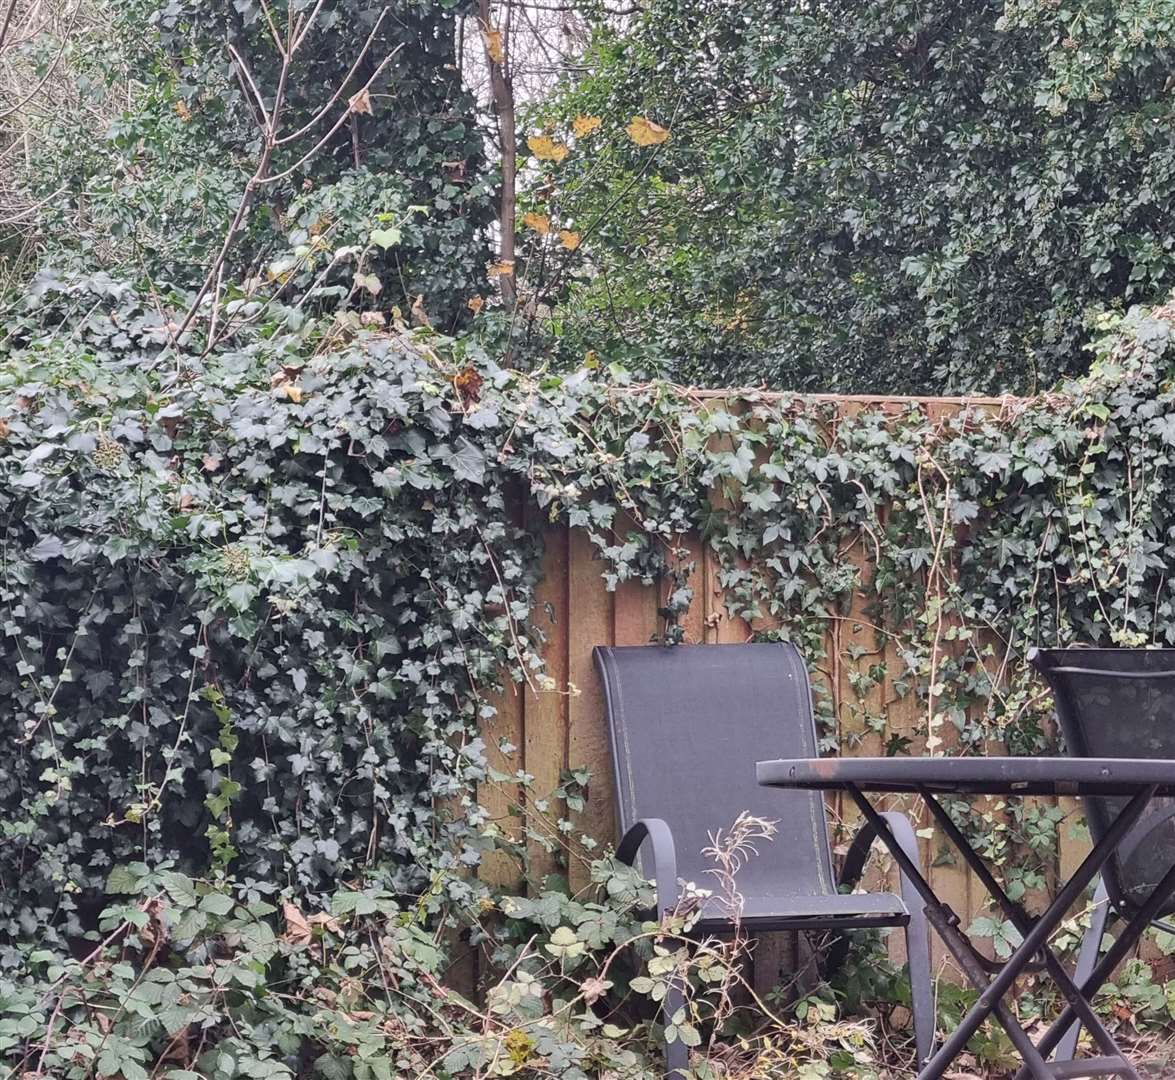 Thieves jumped over garden fence using a chair at gated home